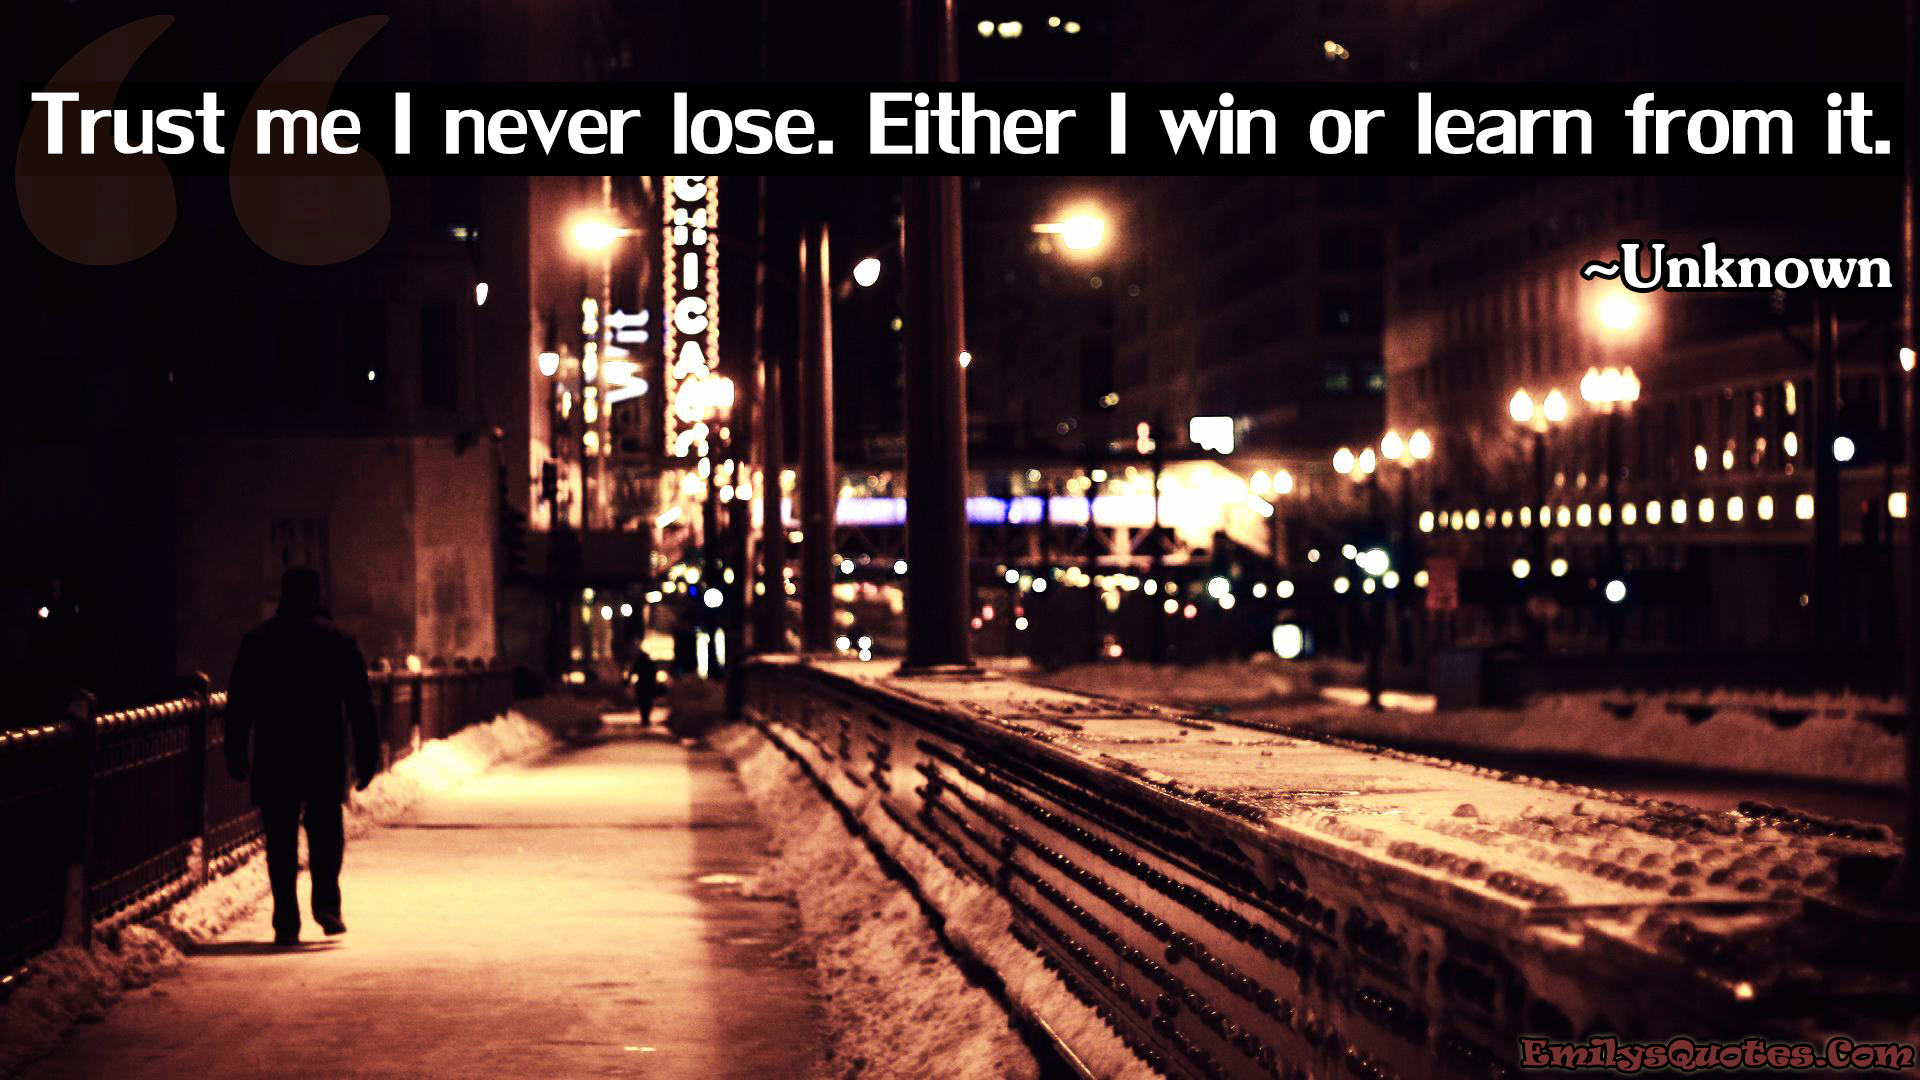 Trust me I never lose. Either I win or learn from it